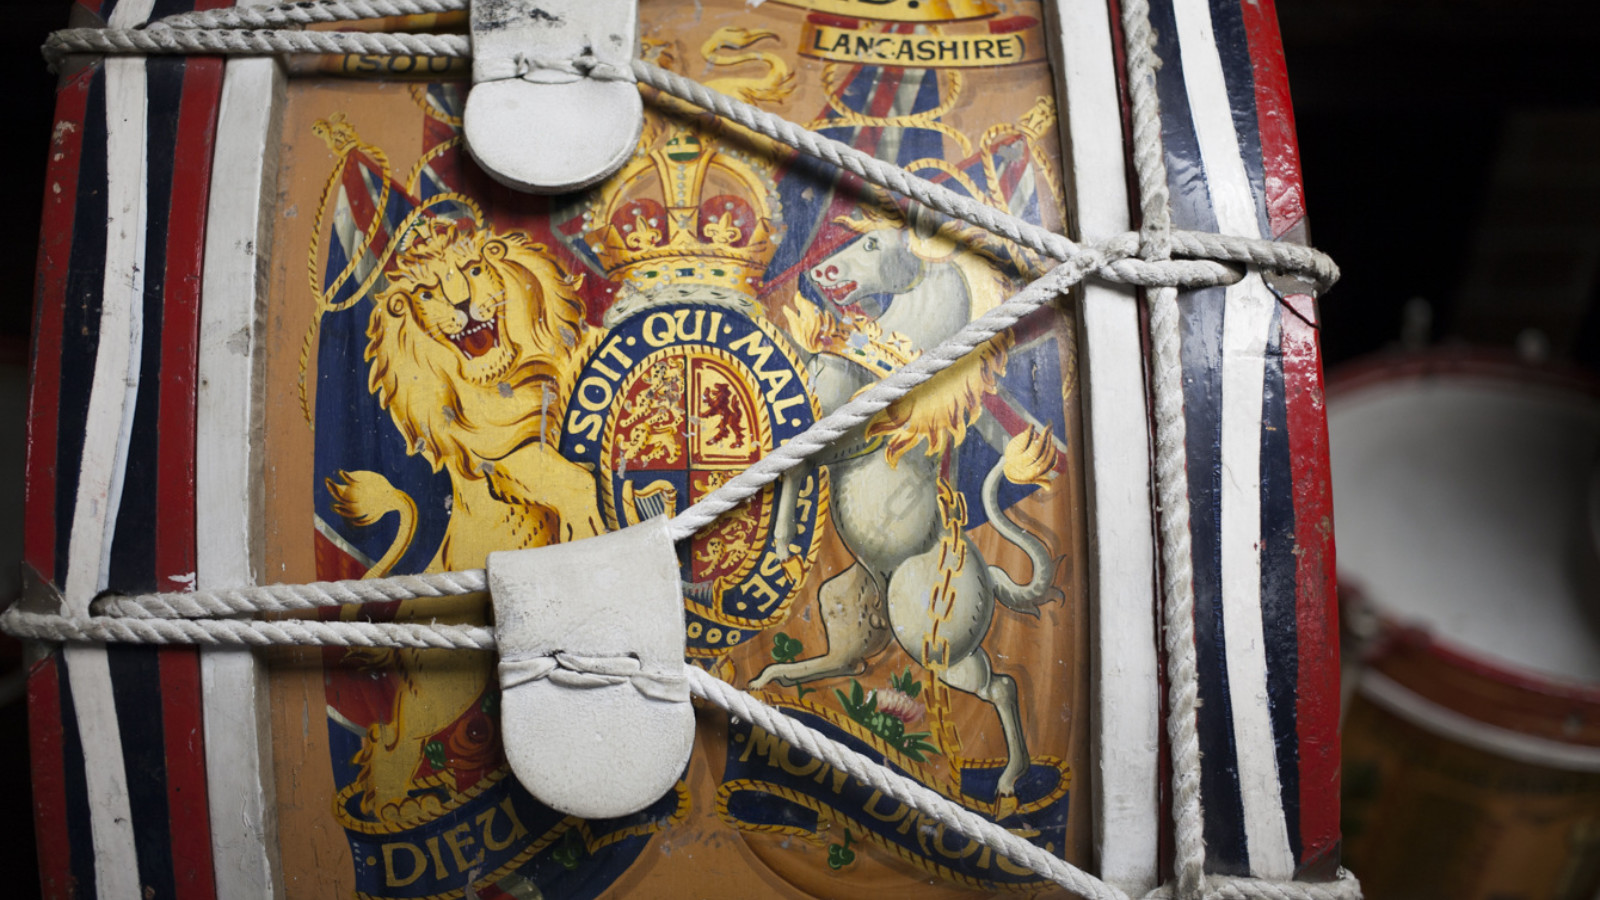 A close up image of a crest with a lion and a horse painted on to wood and wrapped in ropes.